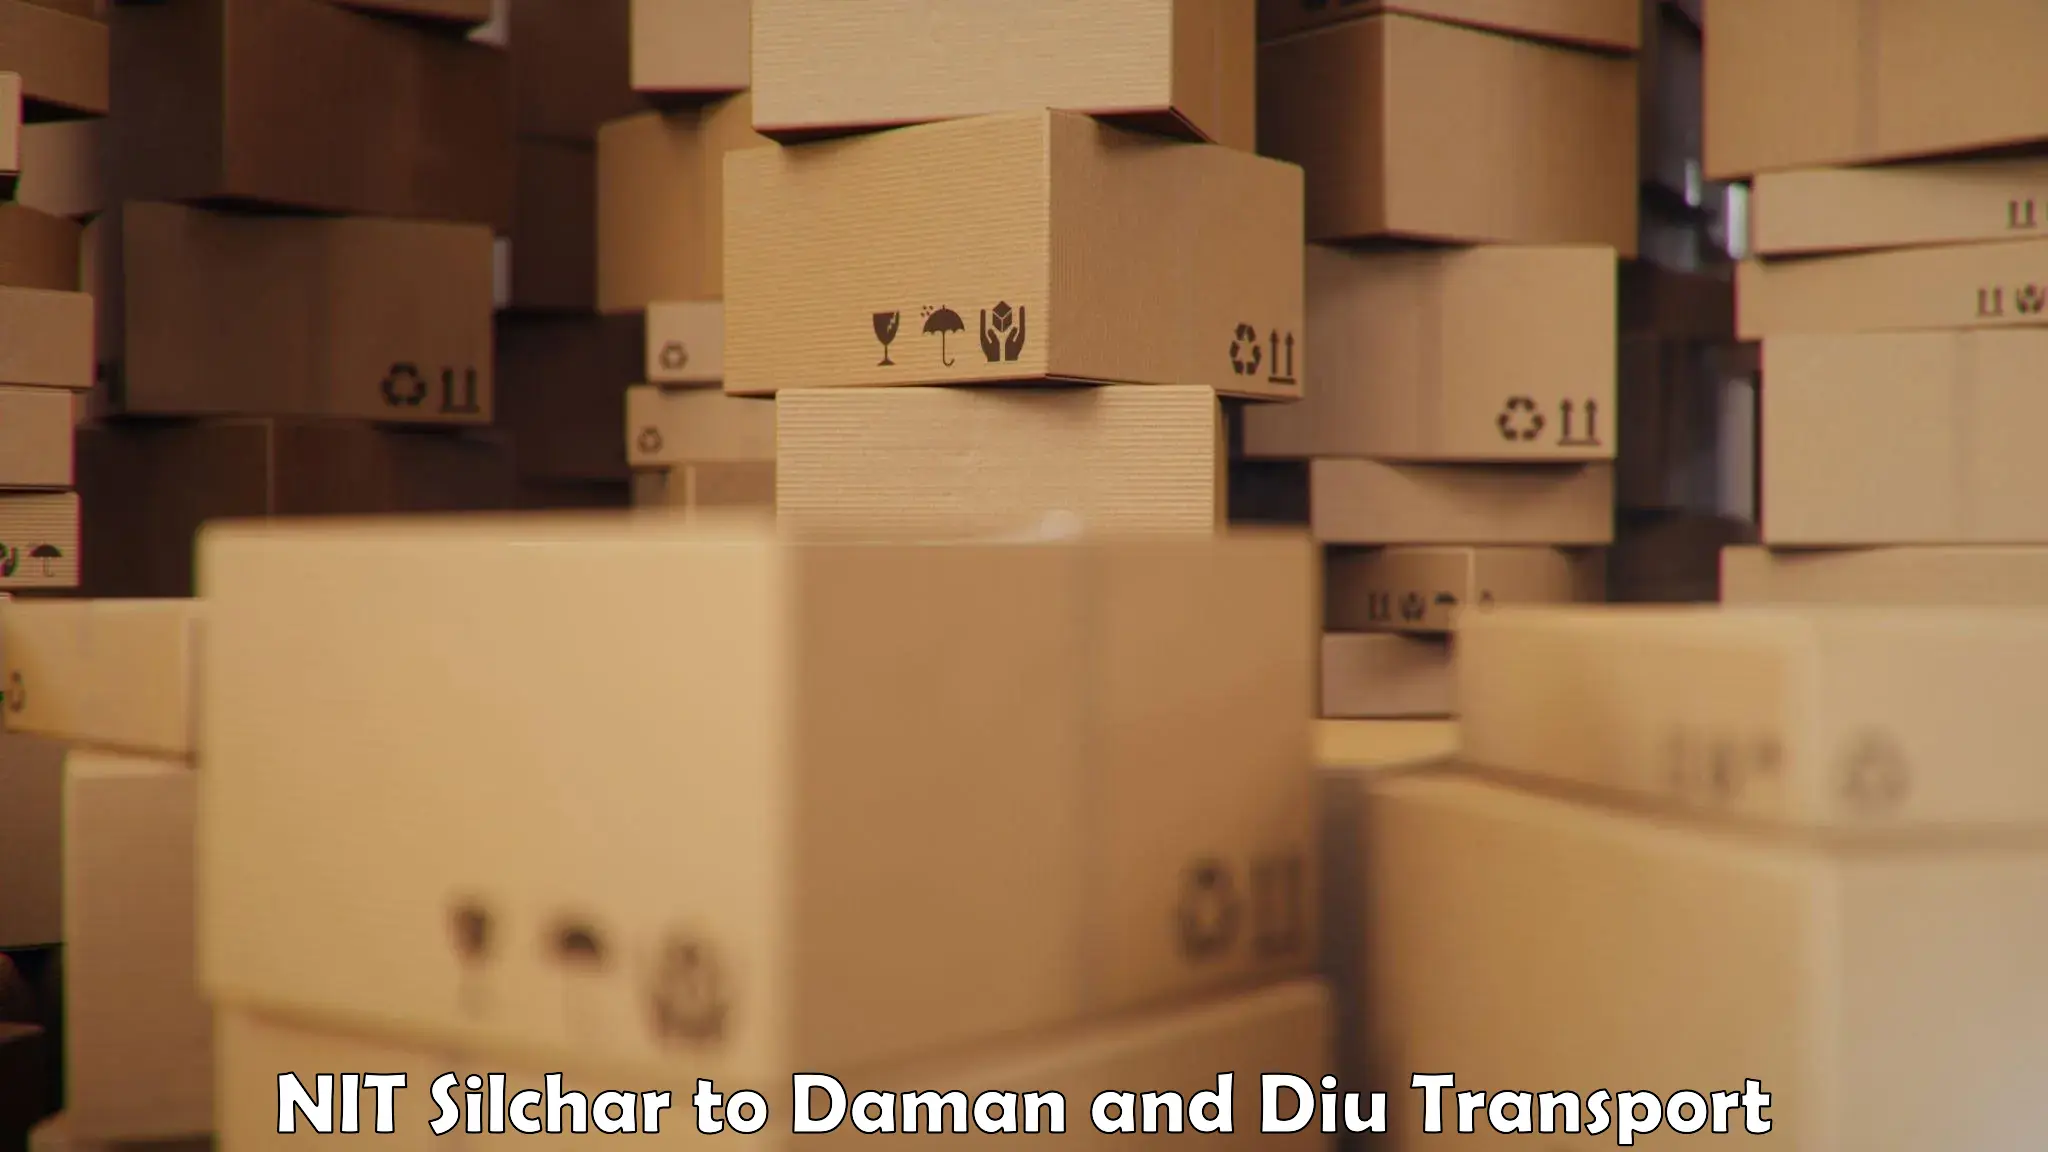 Container transportation services in NIT Silchar to Diu